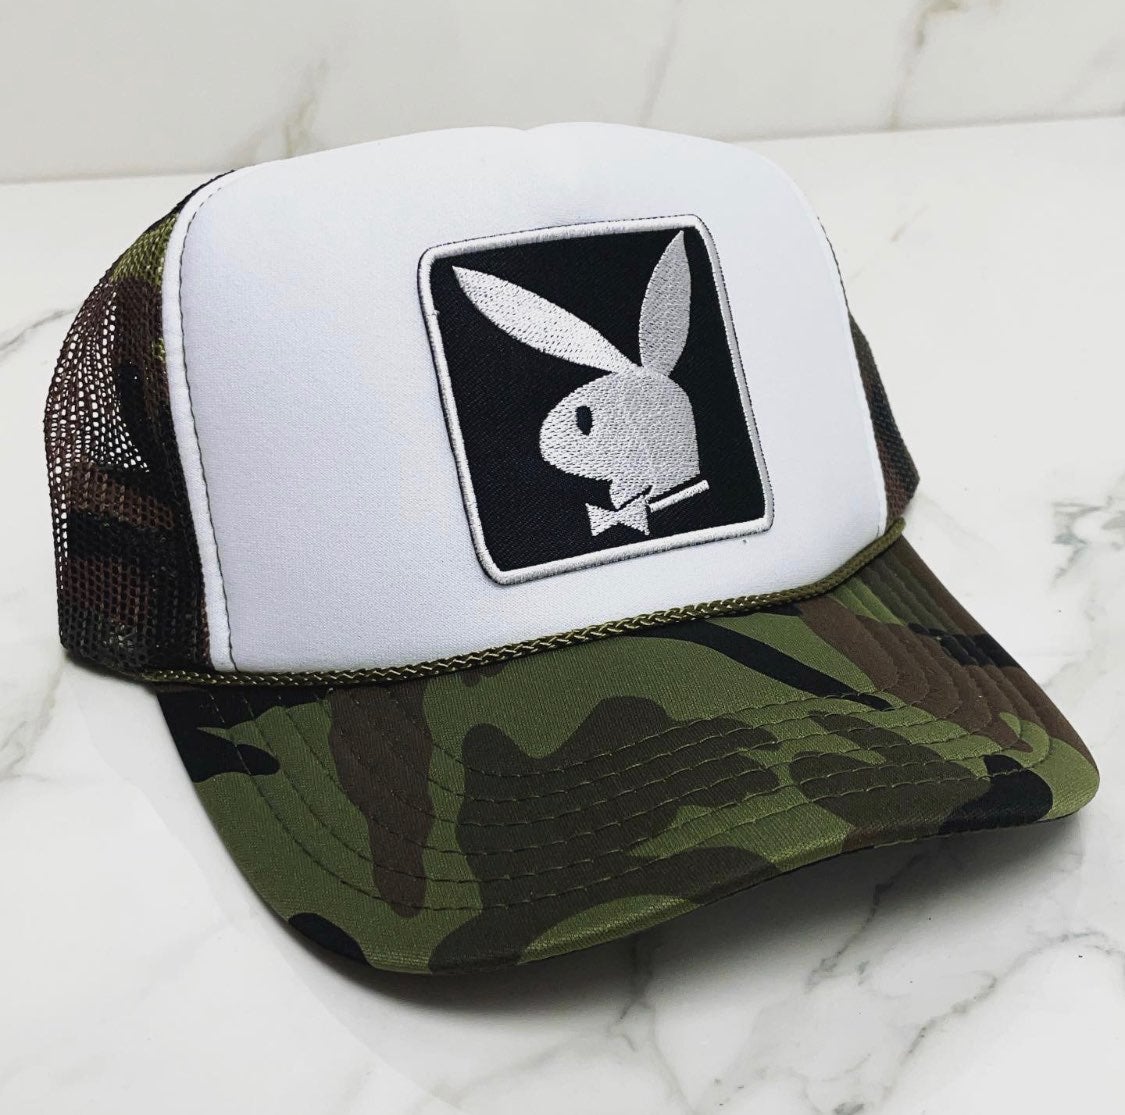 Custom @Playboy Hat made by me 🐰👯‍♀️ Only @Print Masters Global Wha